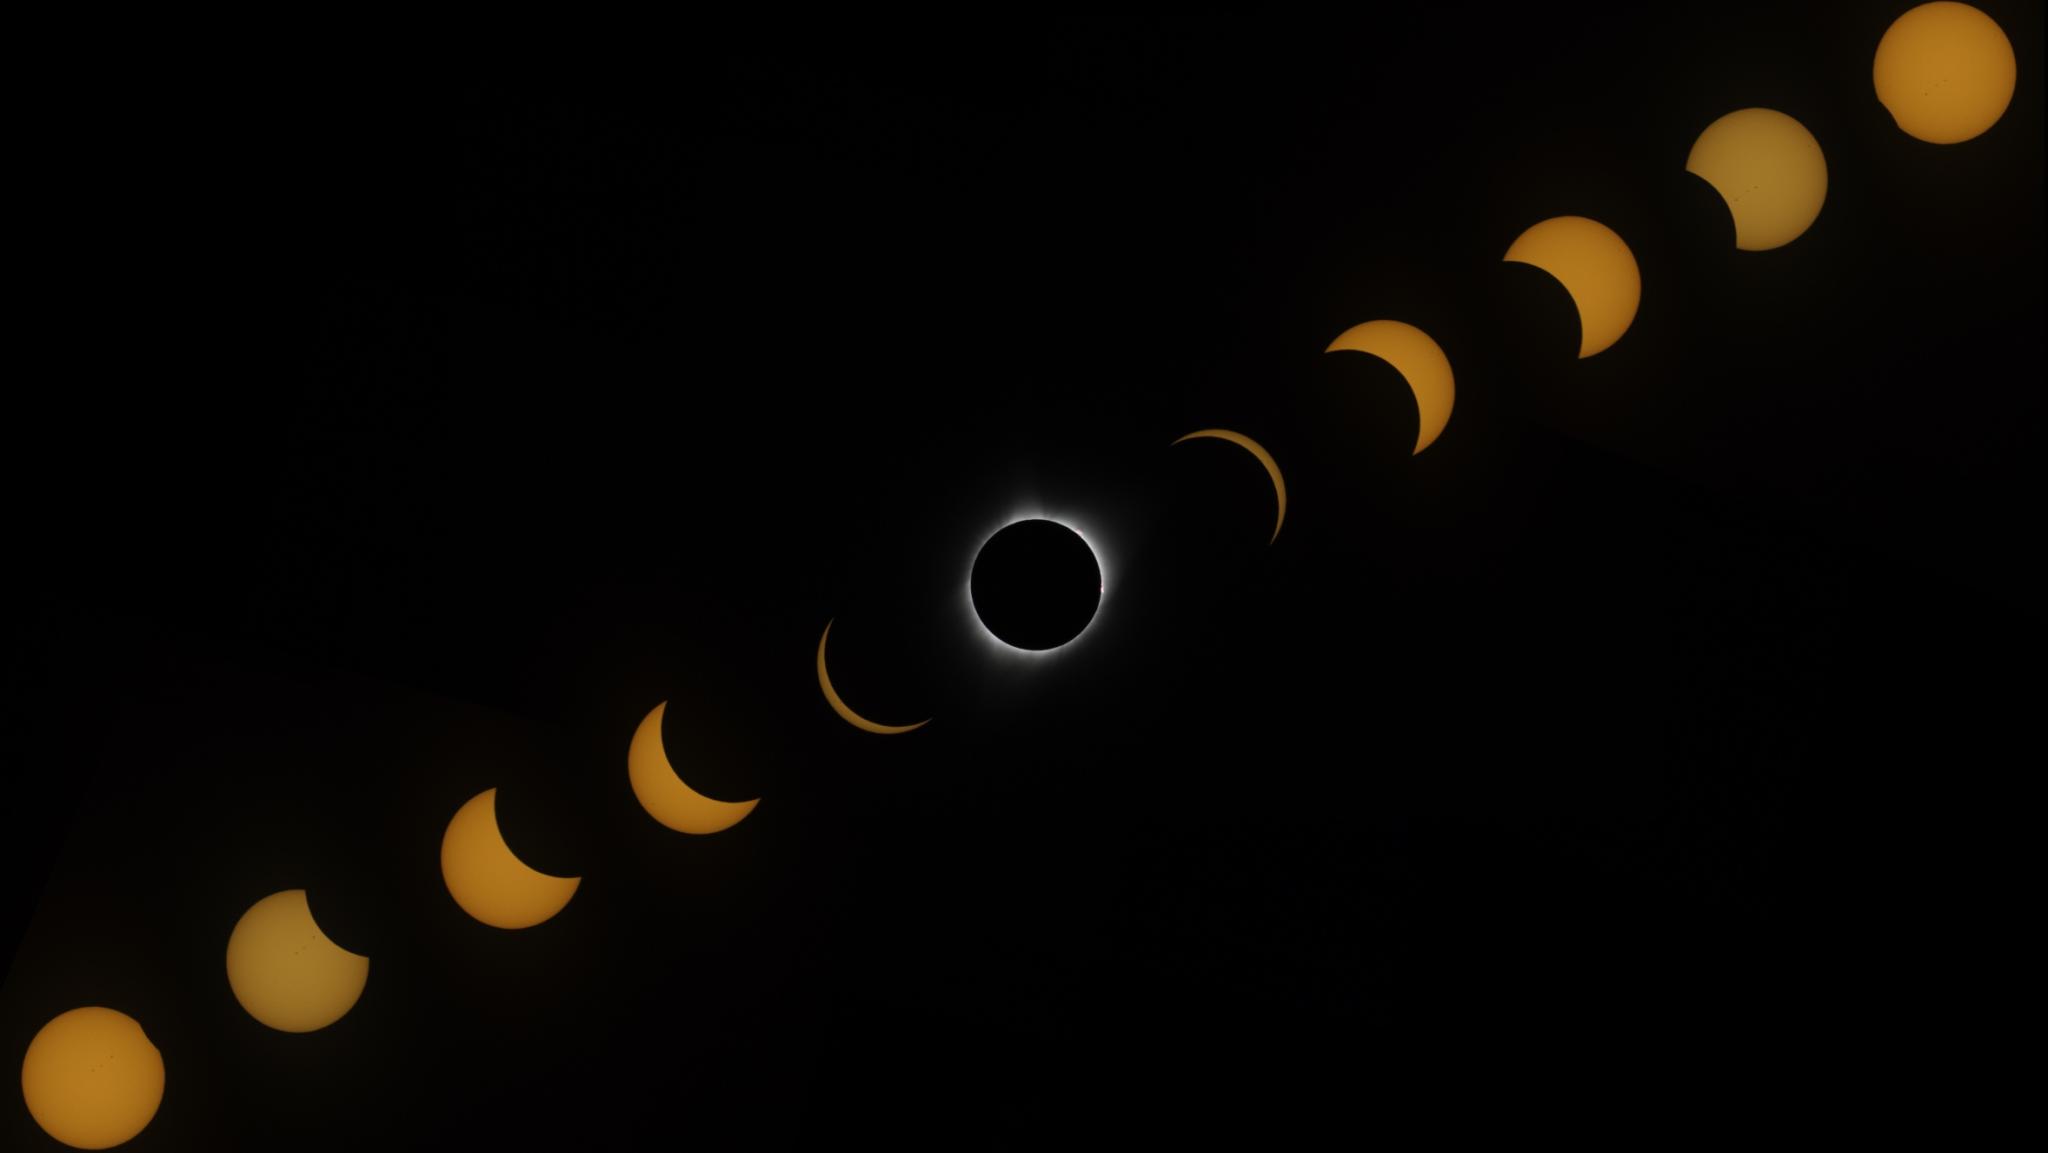 The sequence of an eclipse from partial to total to partial again